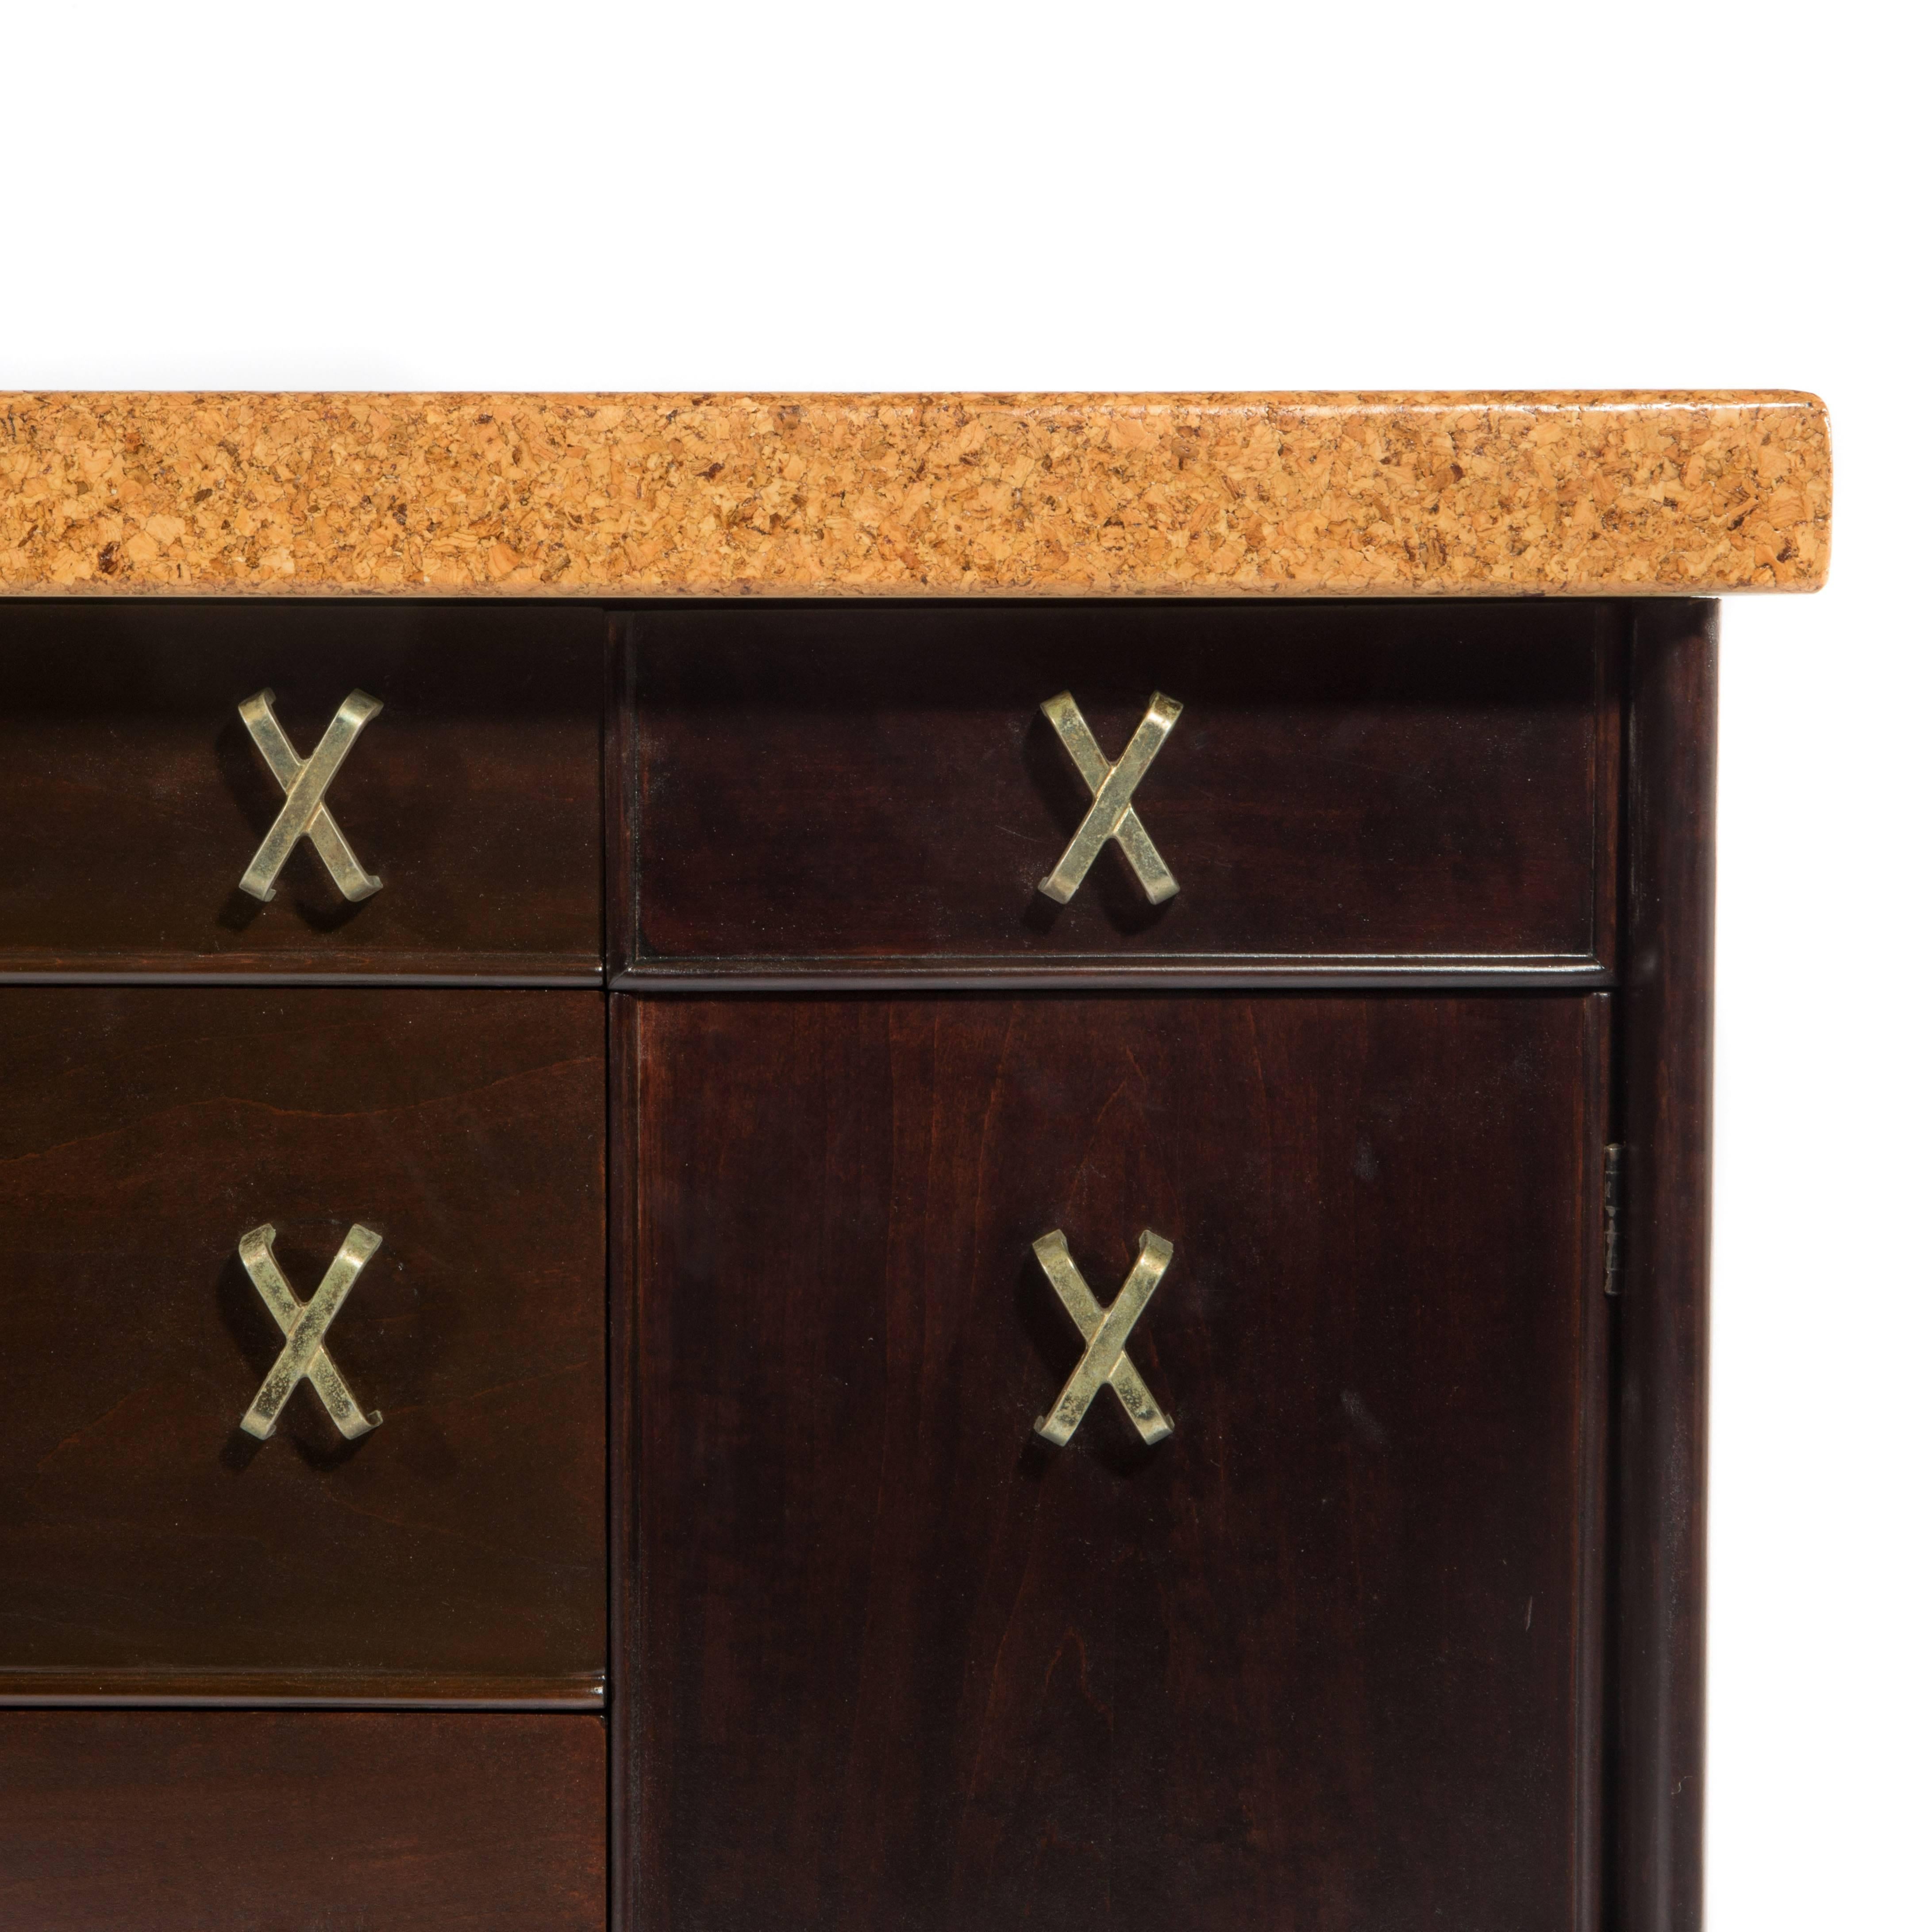 Mid-20th Century Cork-Top Sideboard by Paul Frankl for Johnson Furniture, circa 1950s